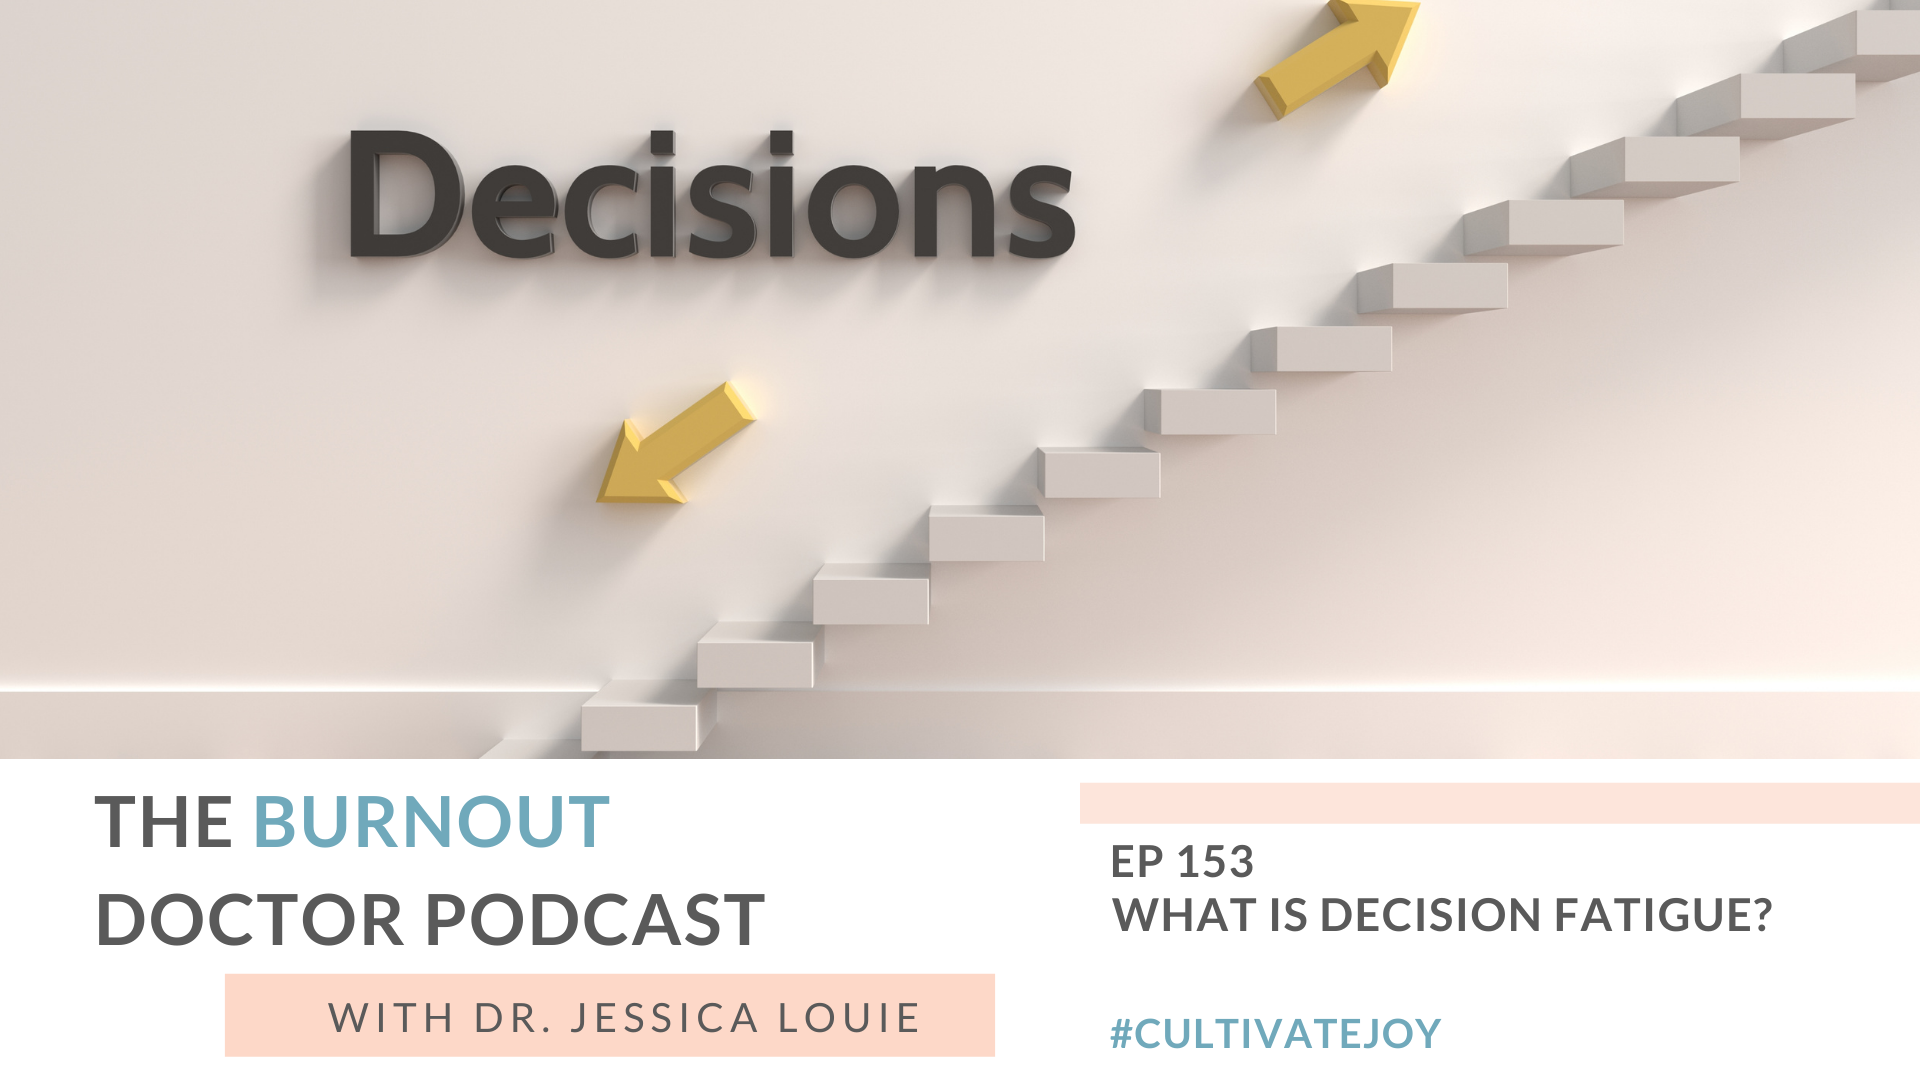 What is decision fatigue? Why mentally drained at the end of the day. What is mental clutter. What is mental load. Dr. Jessica Louie. The Burnout Doctor Podcast.